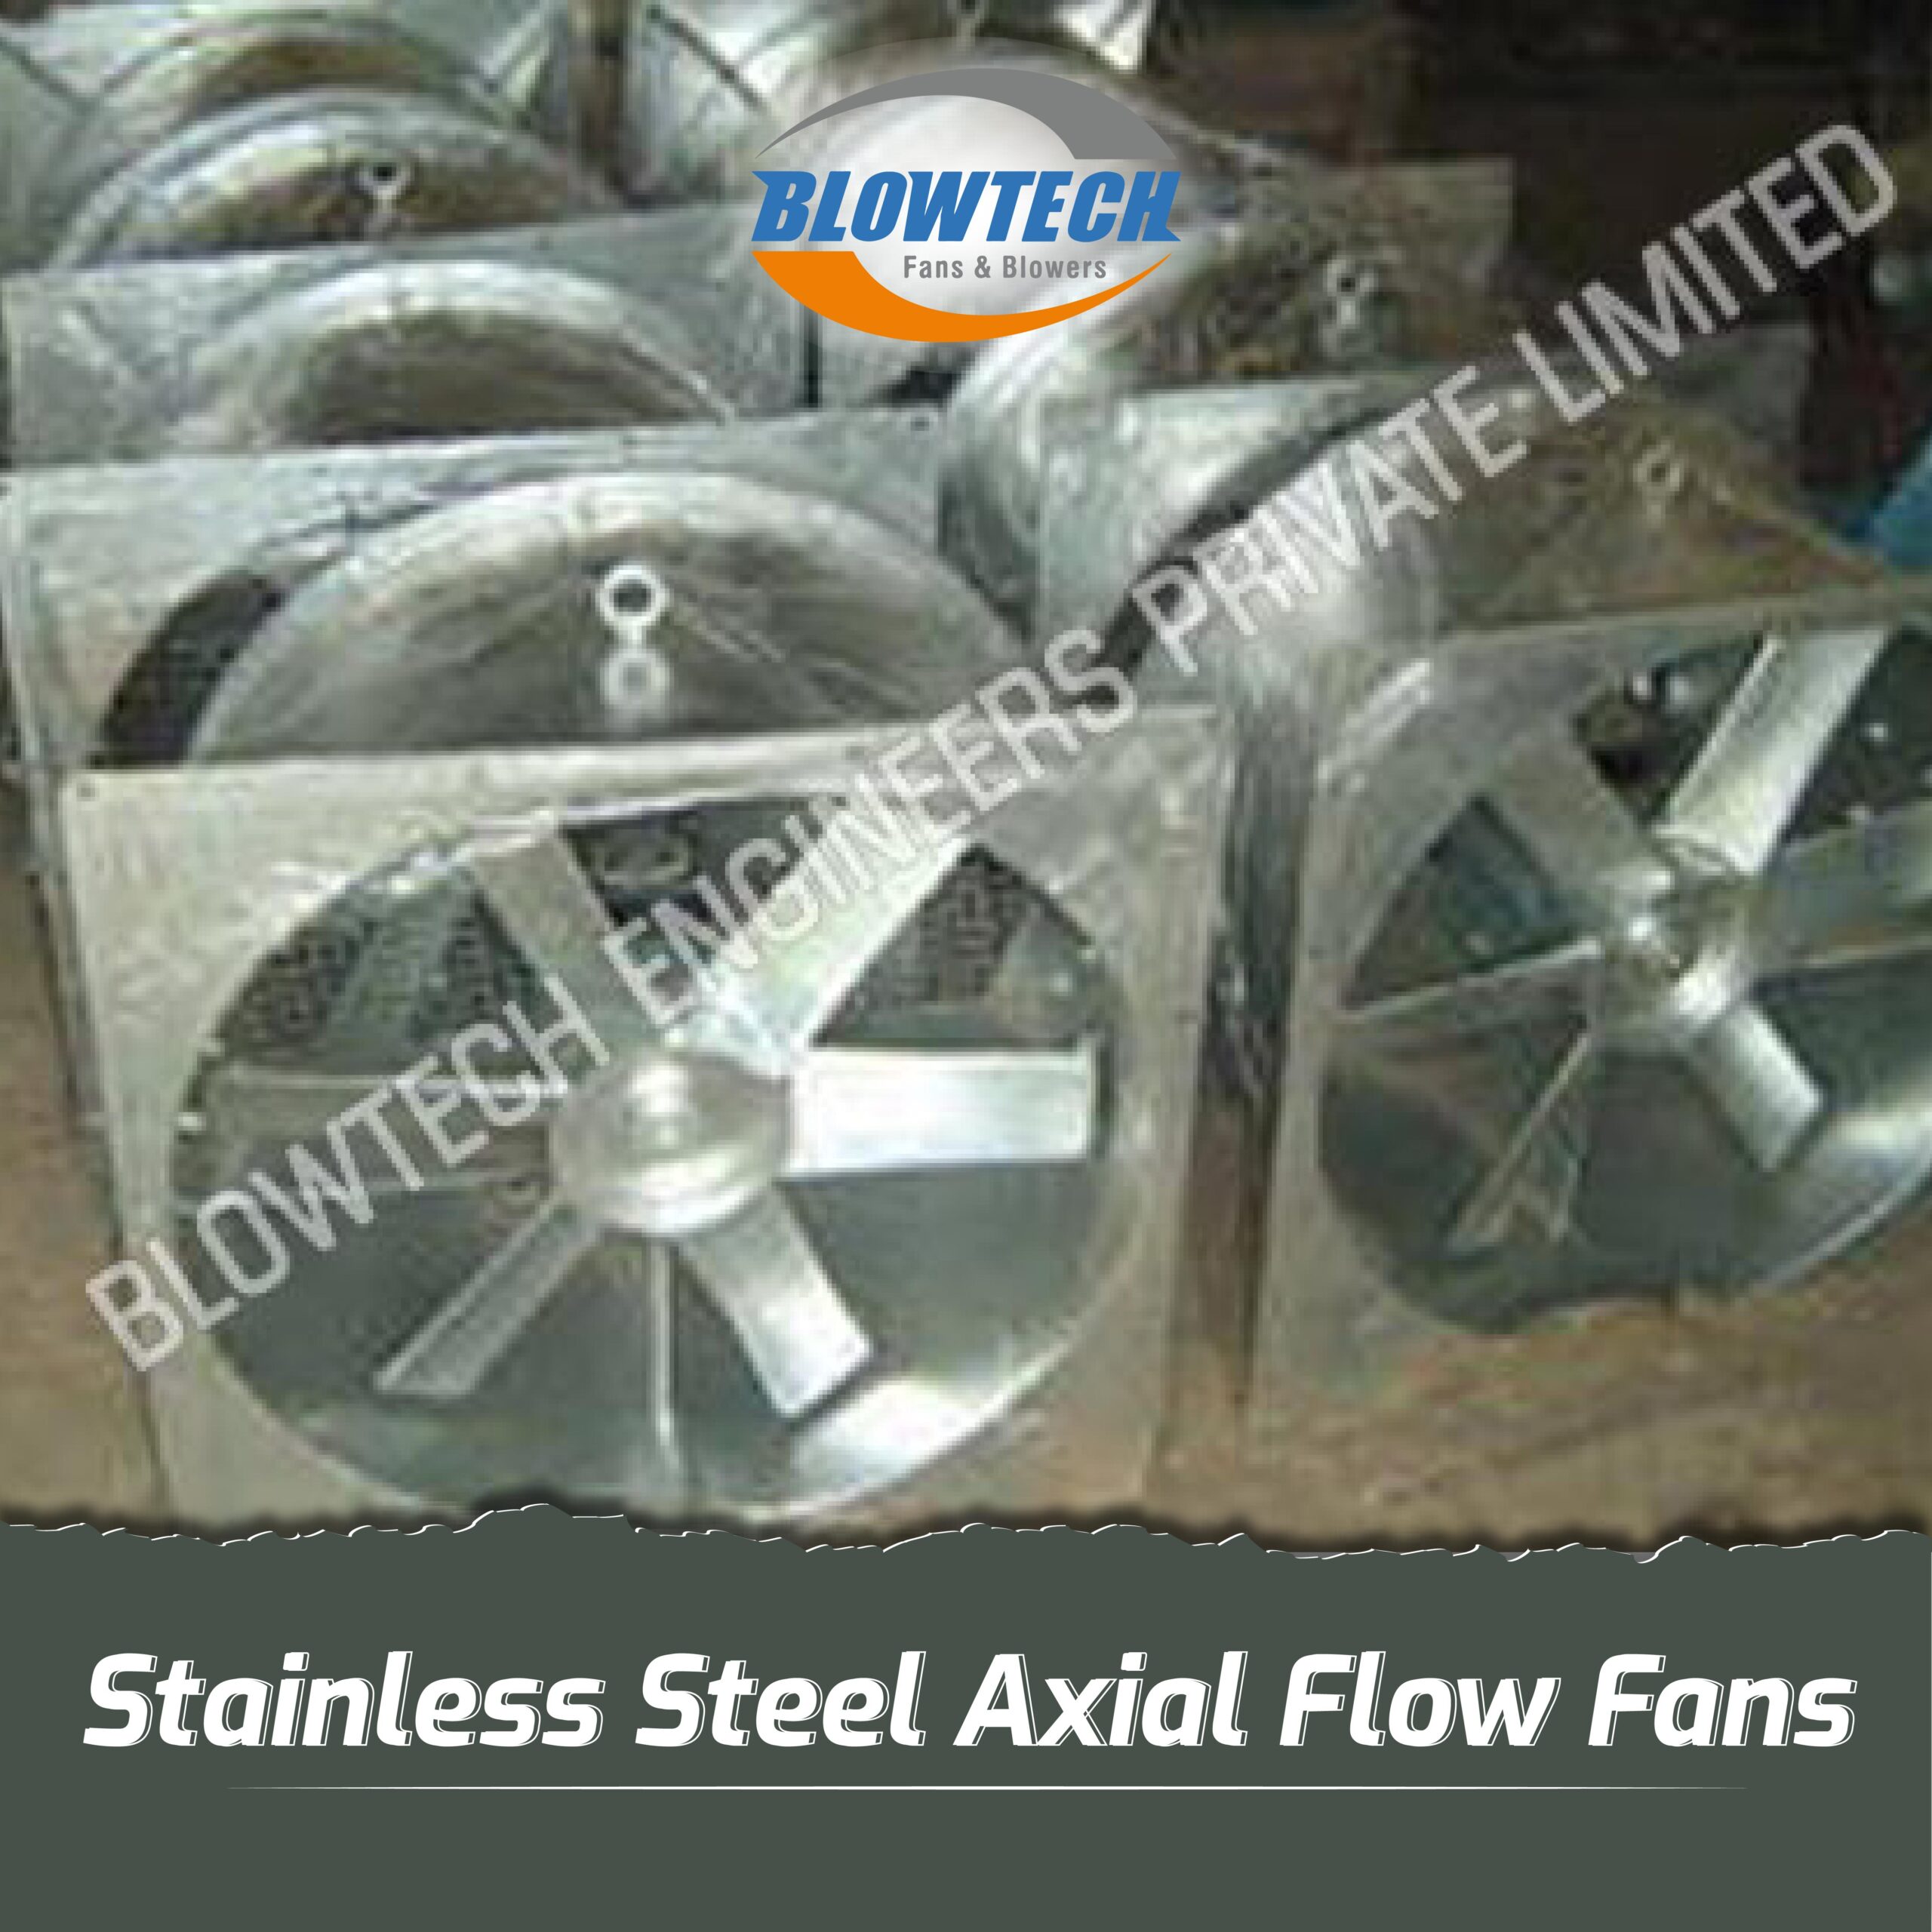 Stainless Steel Axial Flow Fans  manufacturer, supplier and exporter in Mumbai, India